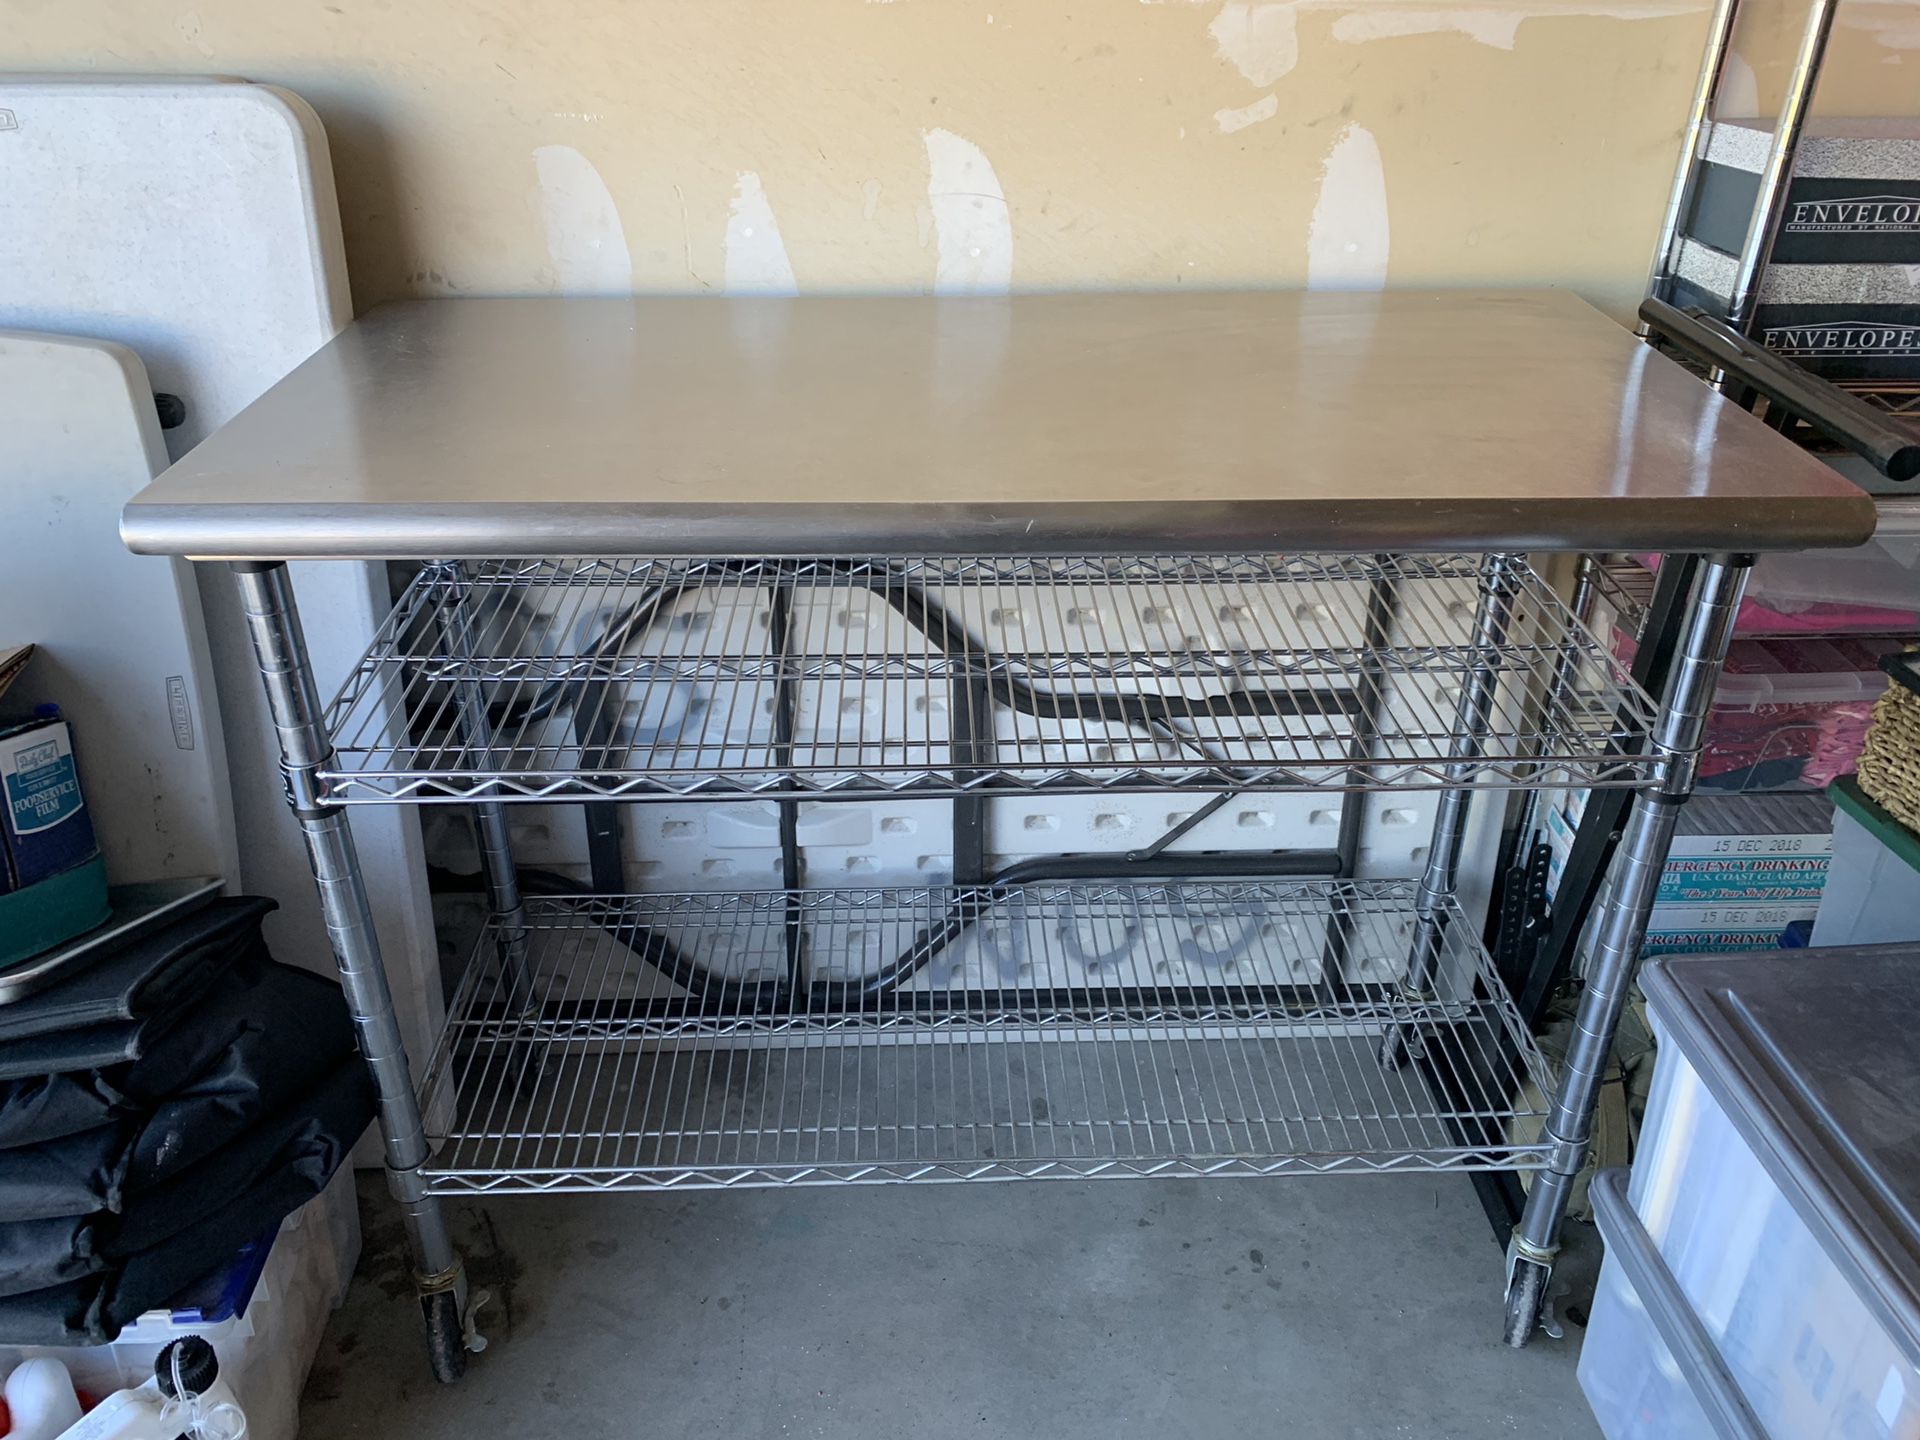 Stainless steel chef’s table or work bench